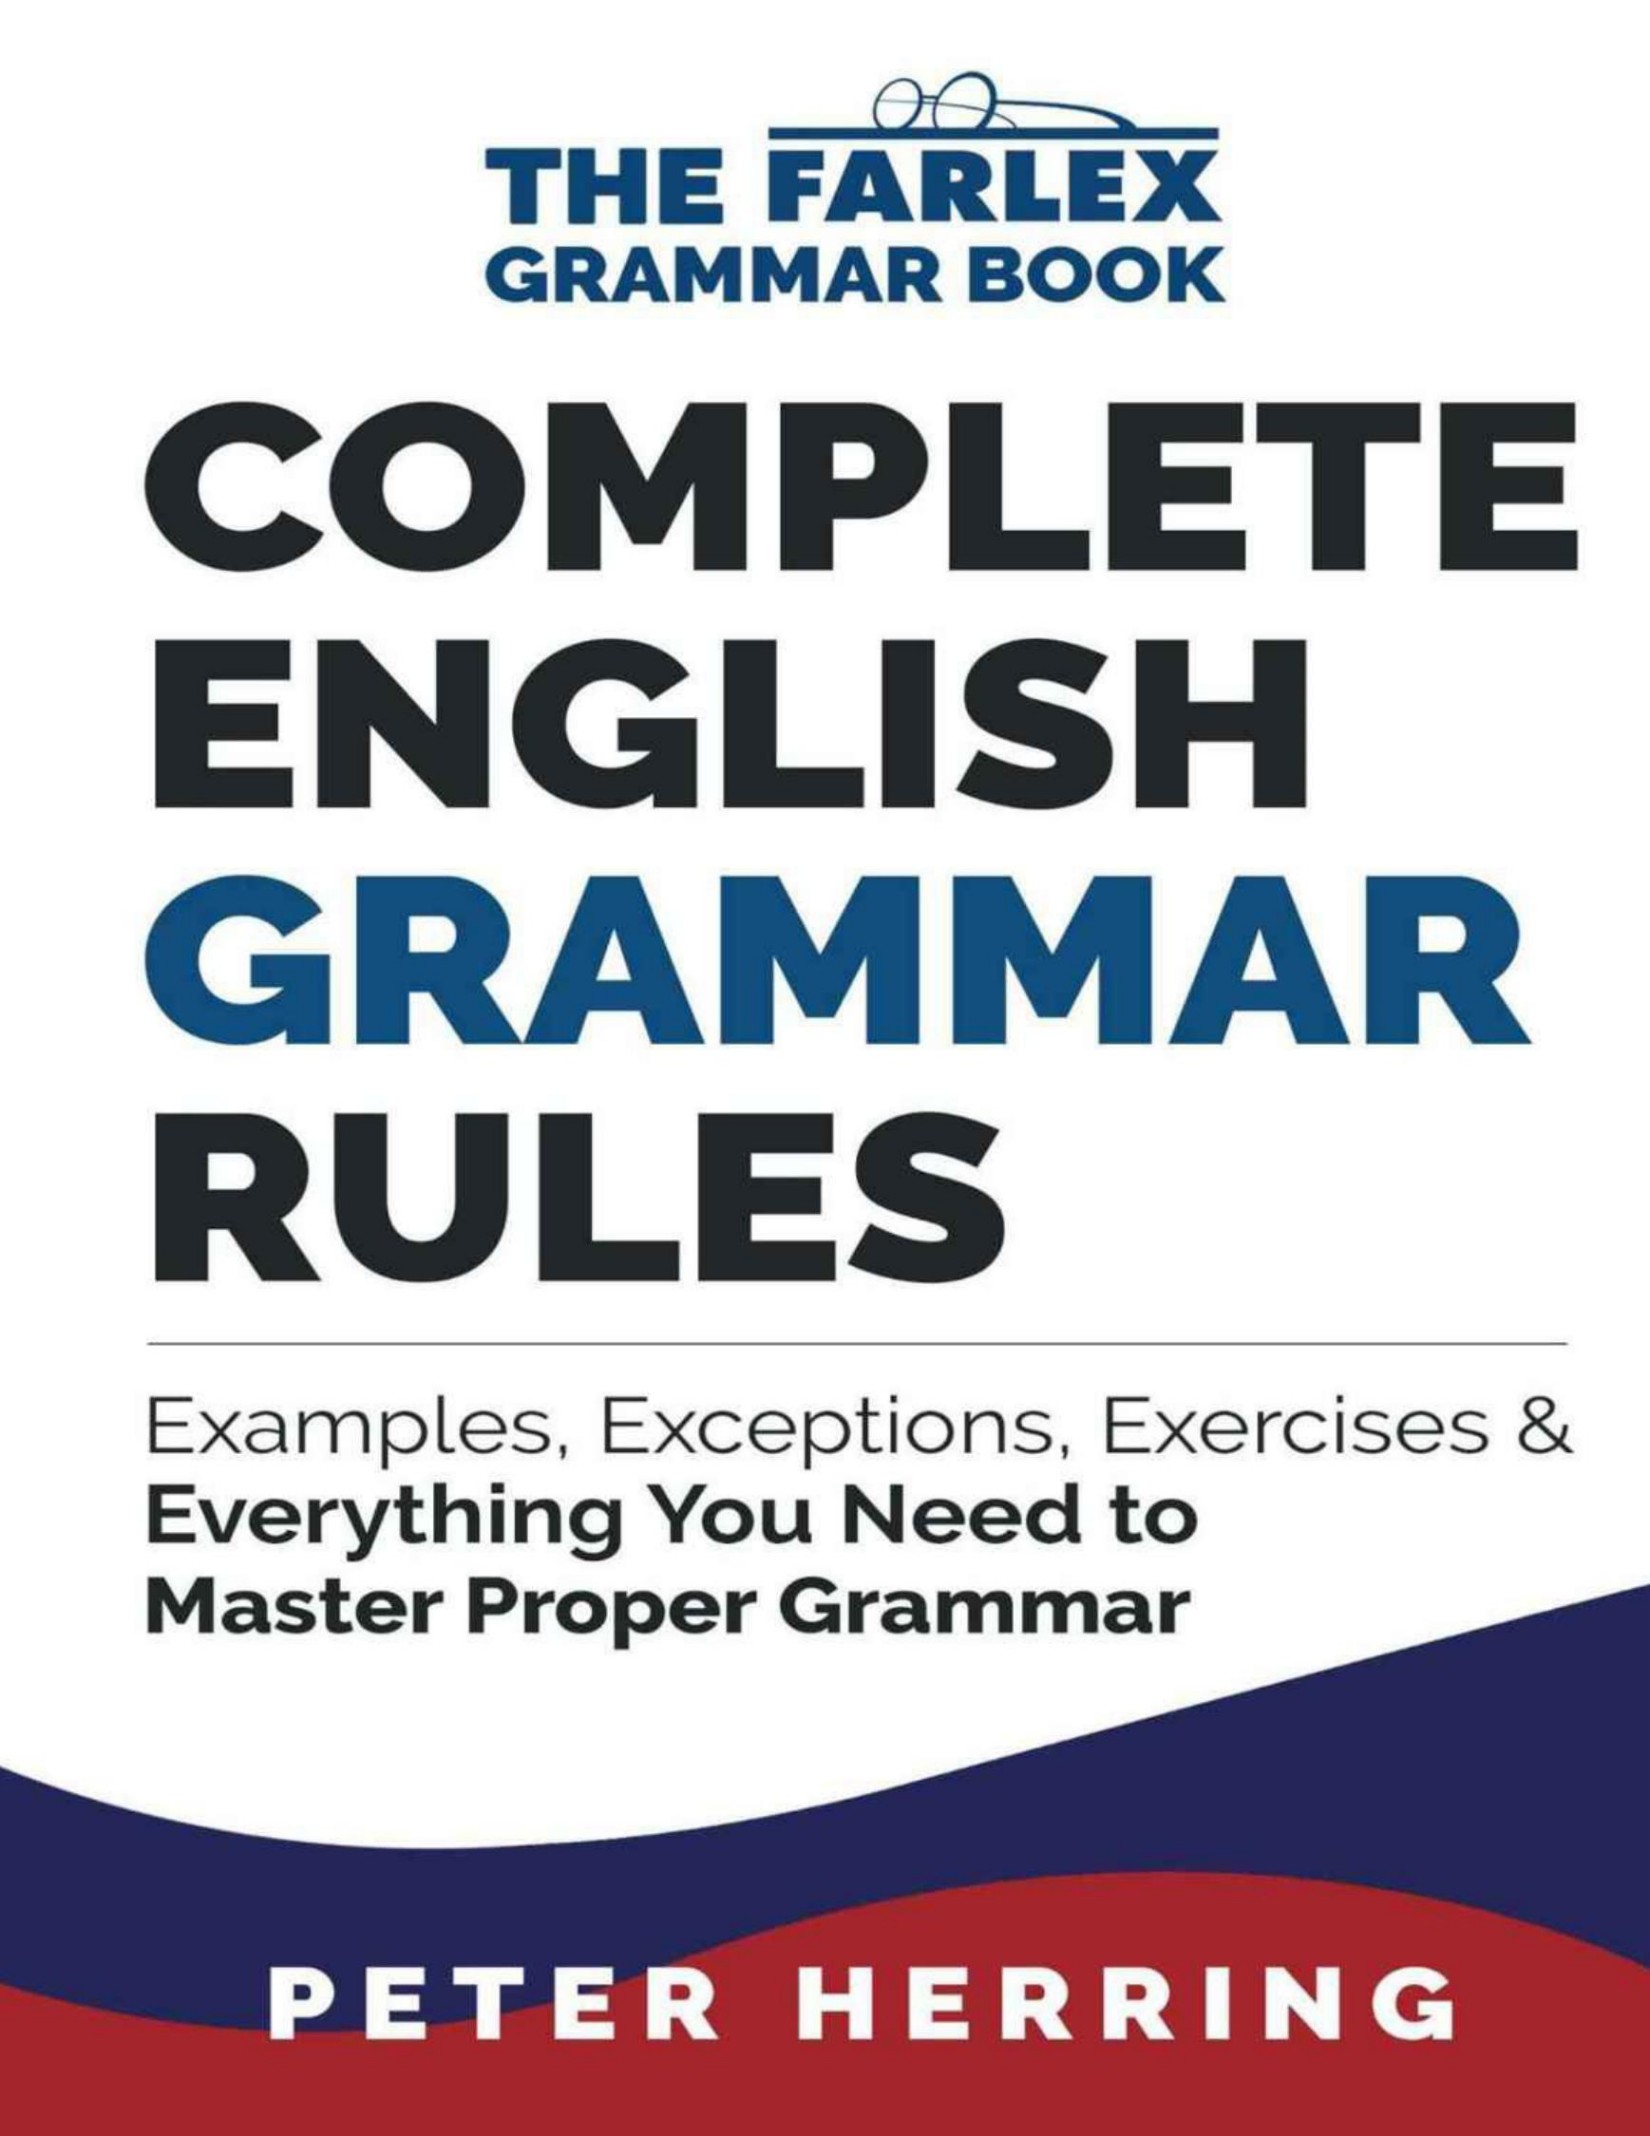 Complete English Grammar Rules- Examples, Exceptions & Everything You Need to Master Proper Grammar 2016